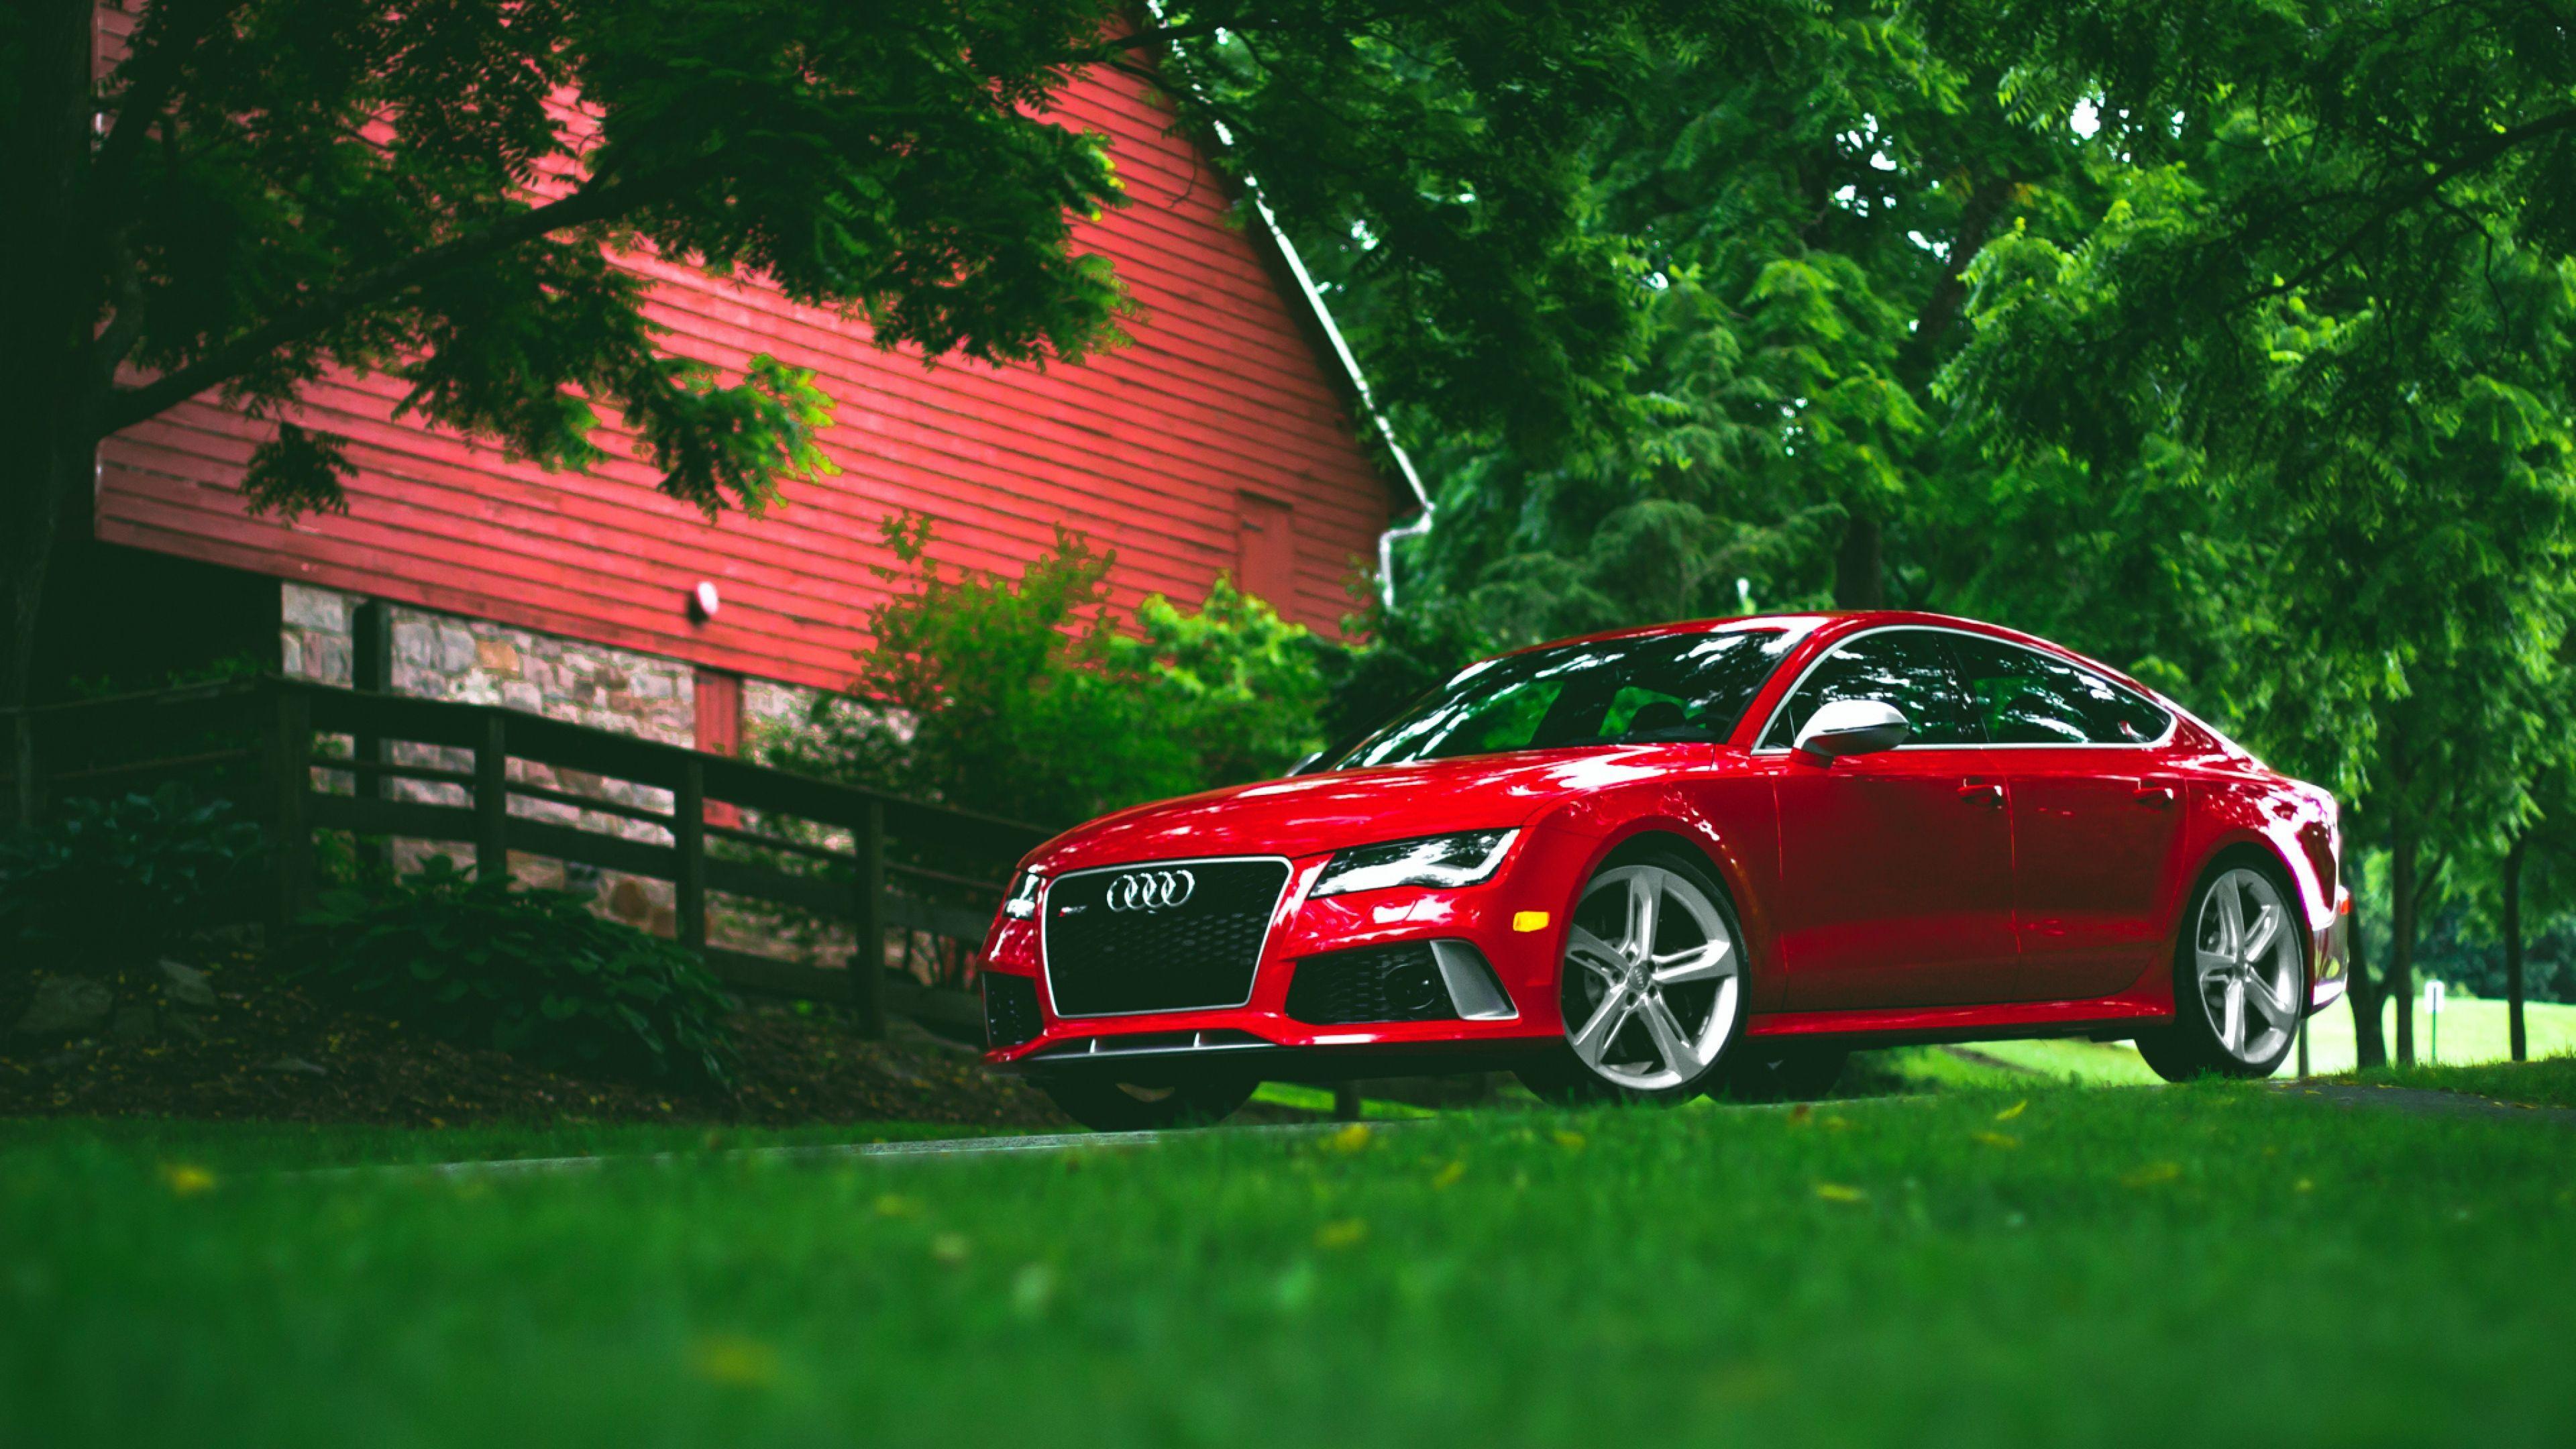 Download Wallpaper 3840x2160 Audi, Rs Red, Grass, Side view 4K